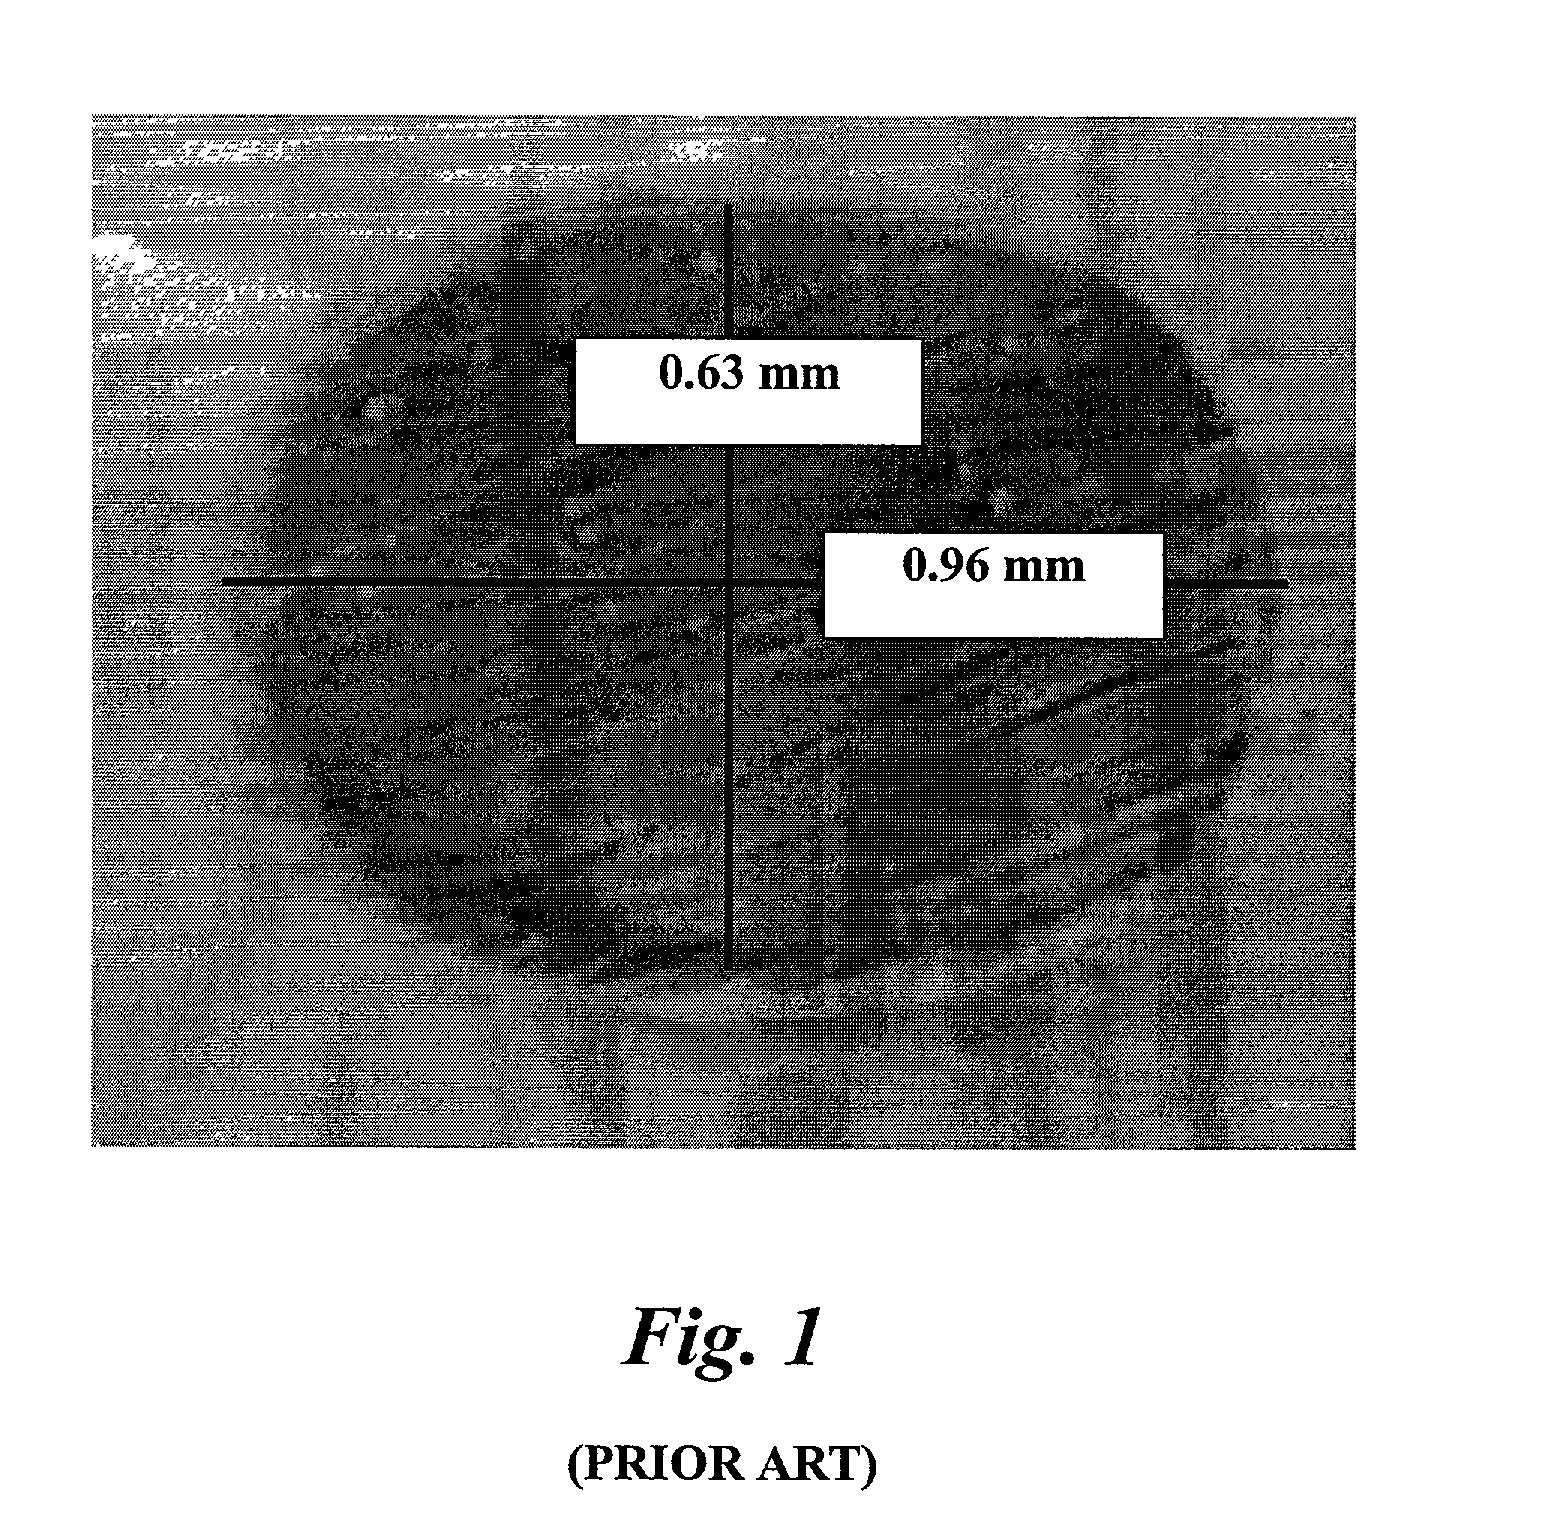 Highly dispersible reinforcing polymeric fibers